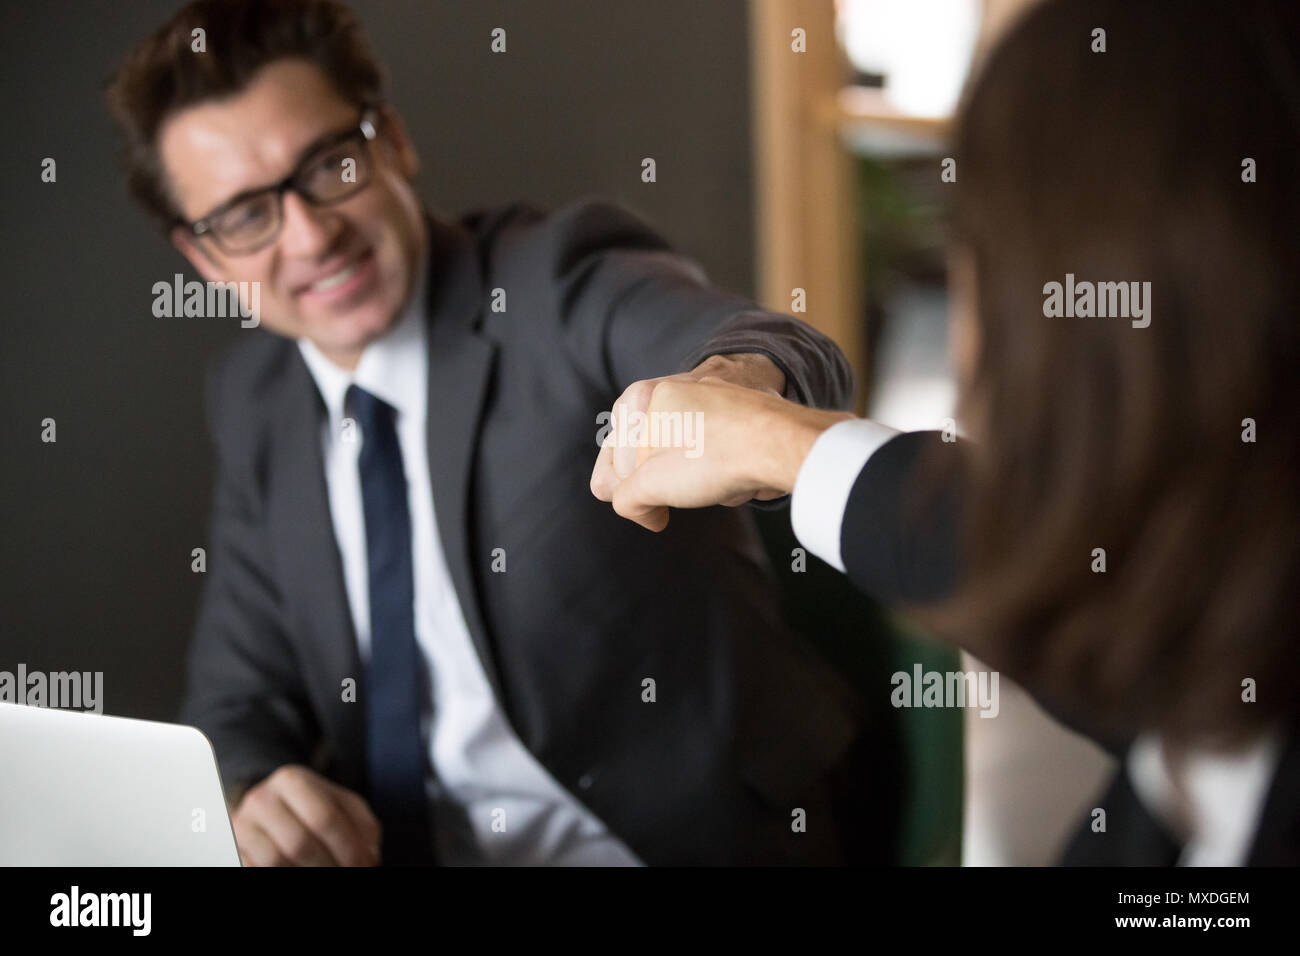 Colleagues giving fists bump celebrating shared business achieve Stock Photo